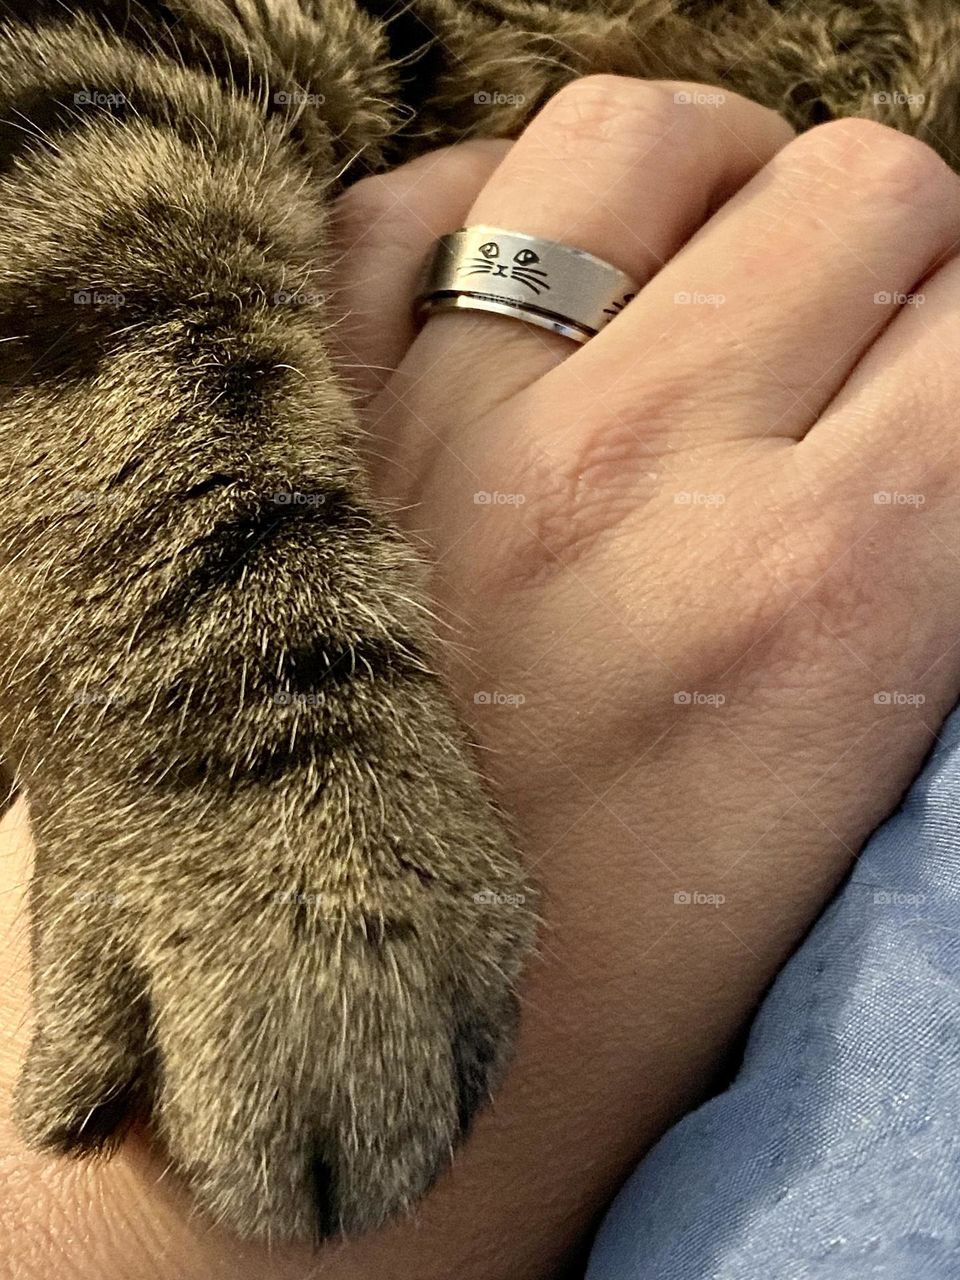 A cats paw resting on a hand wearing a spinner ring